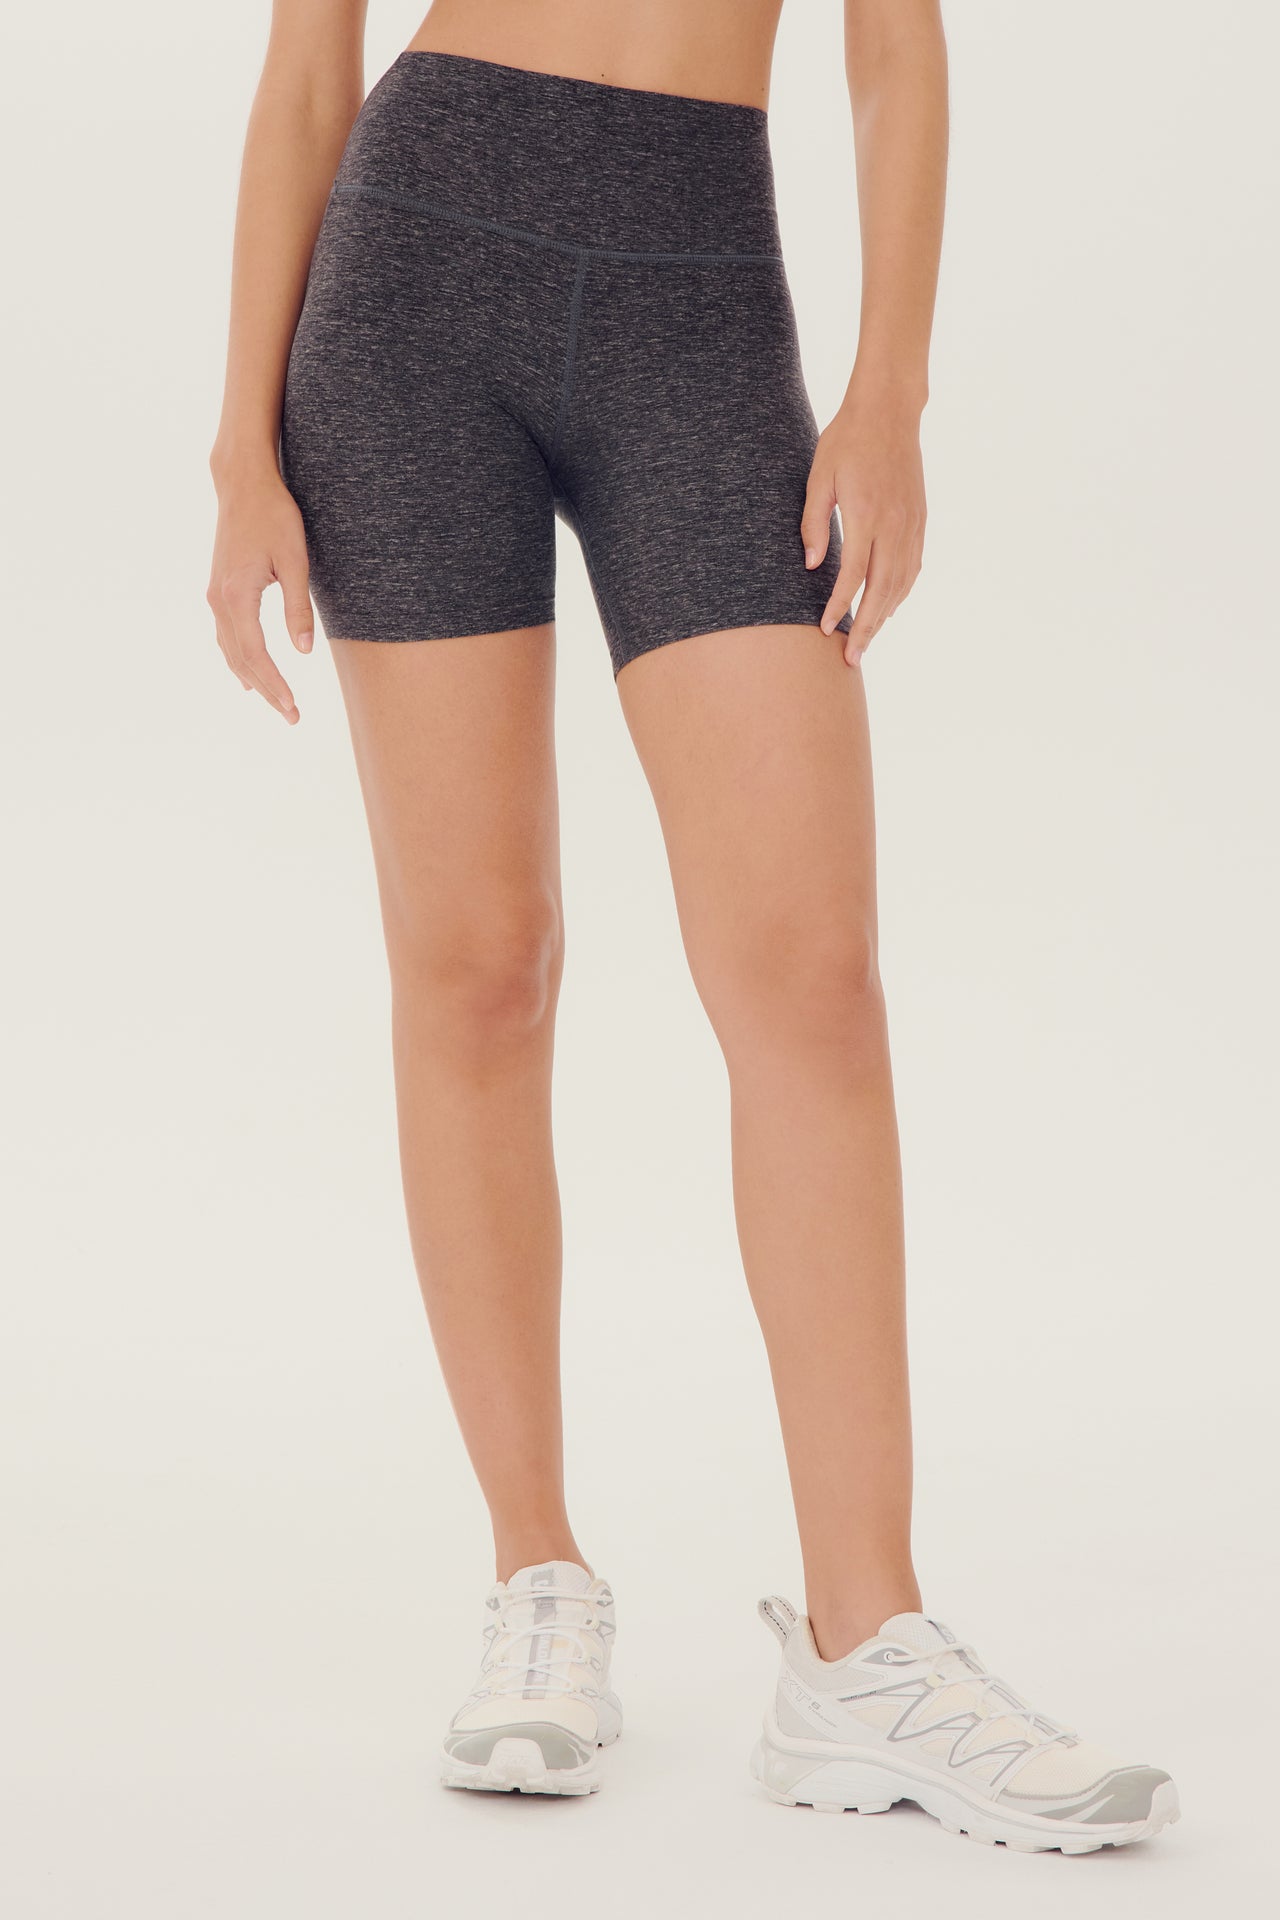 Front view of girl wearing highwaisted mid thigh grey bike shorts withwhite shoes